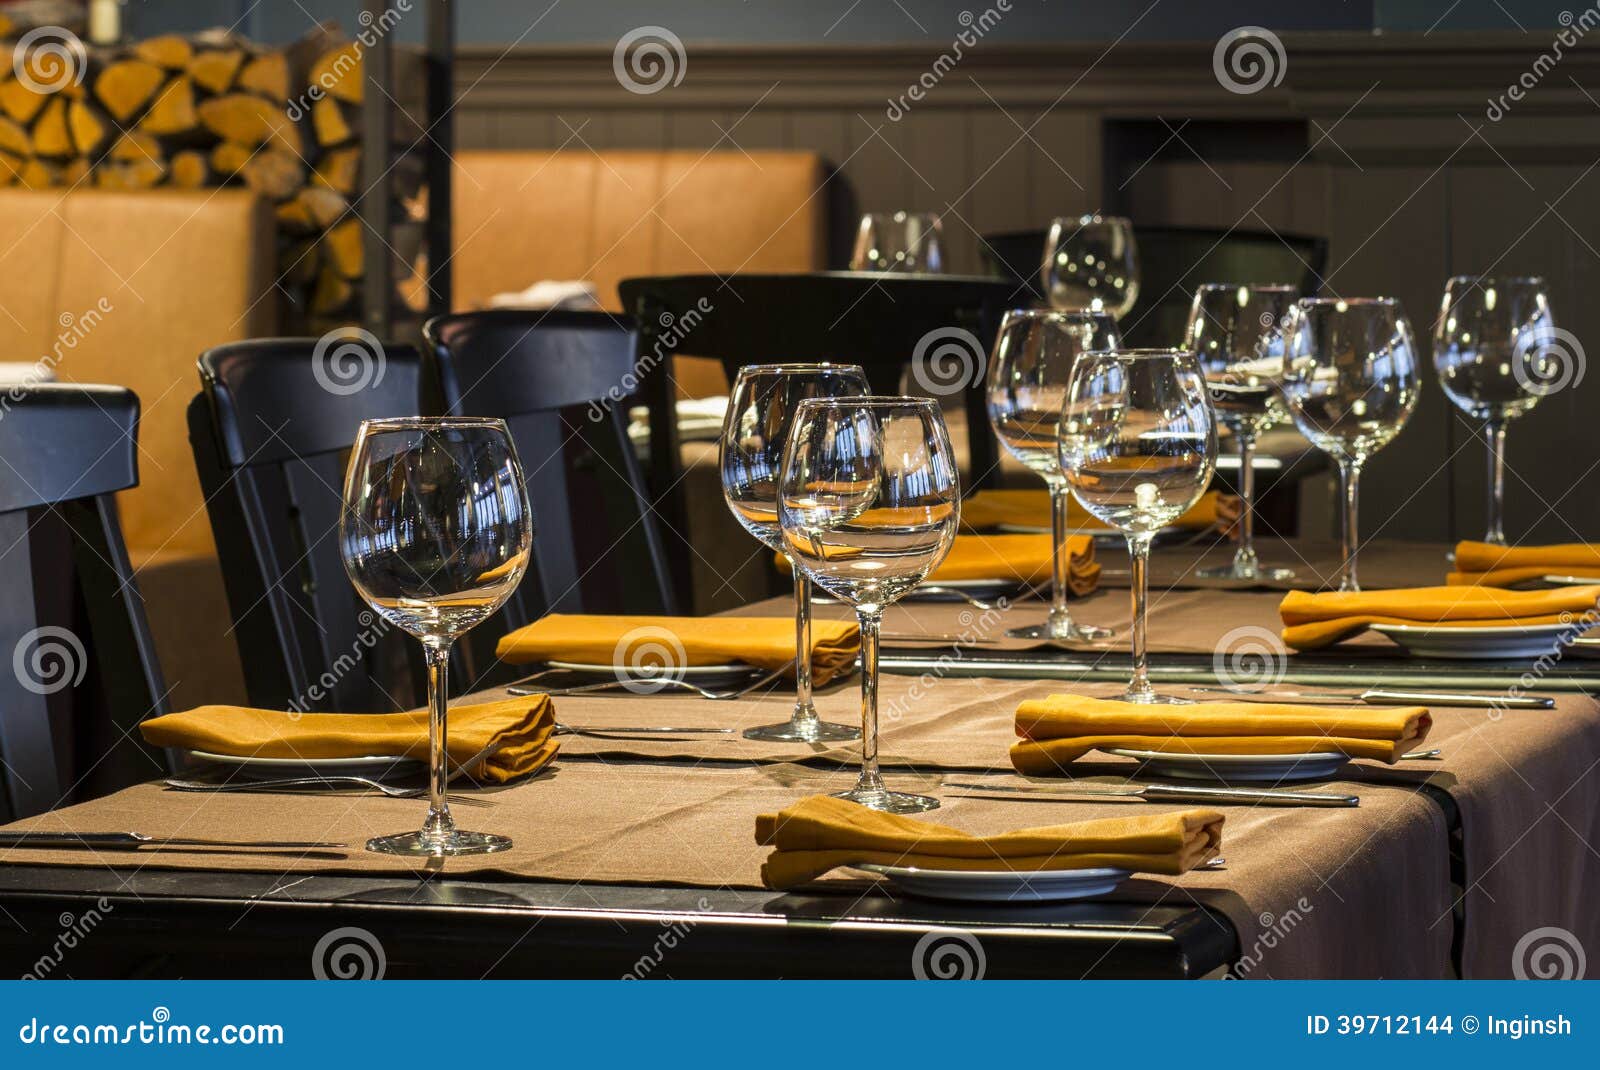 Fine Restaurant Dinner Table Place Setting Stock Photo - Image of